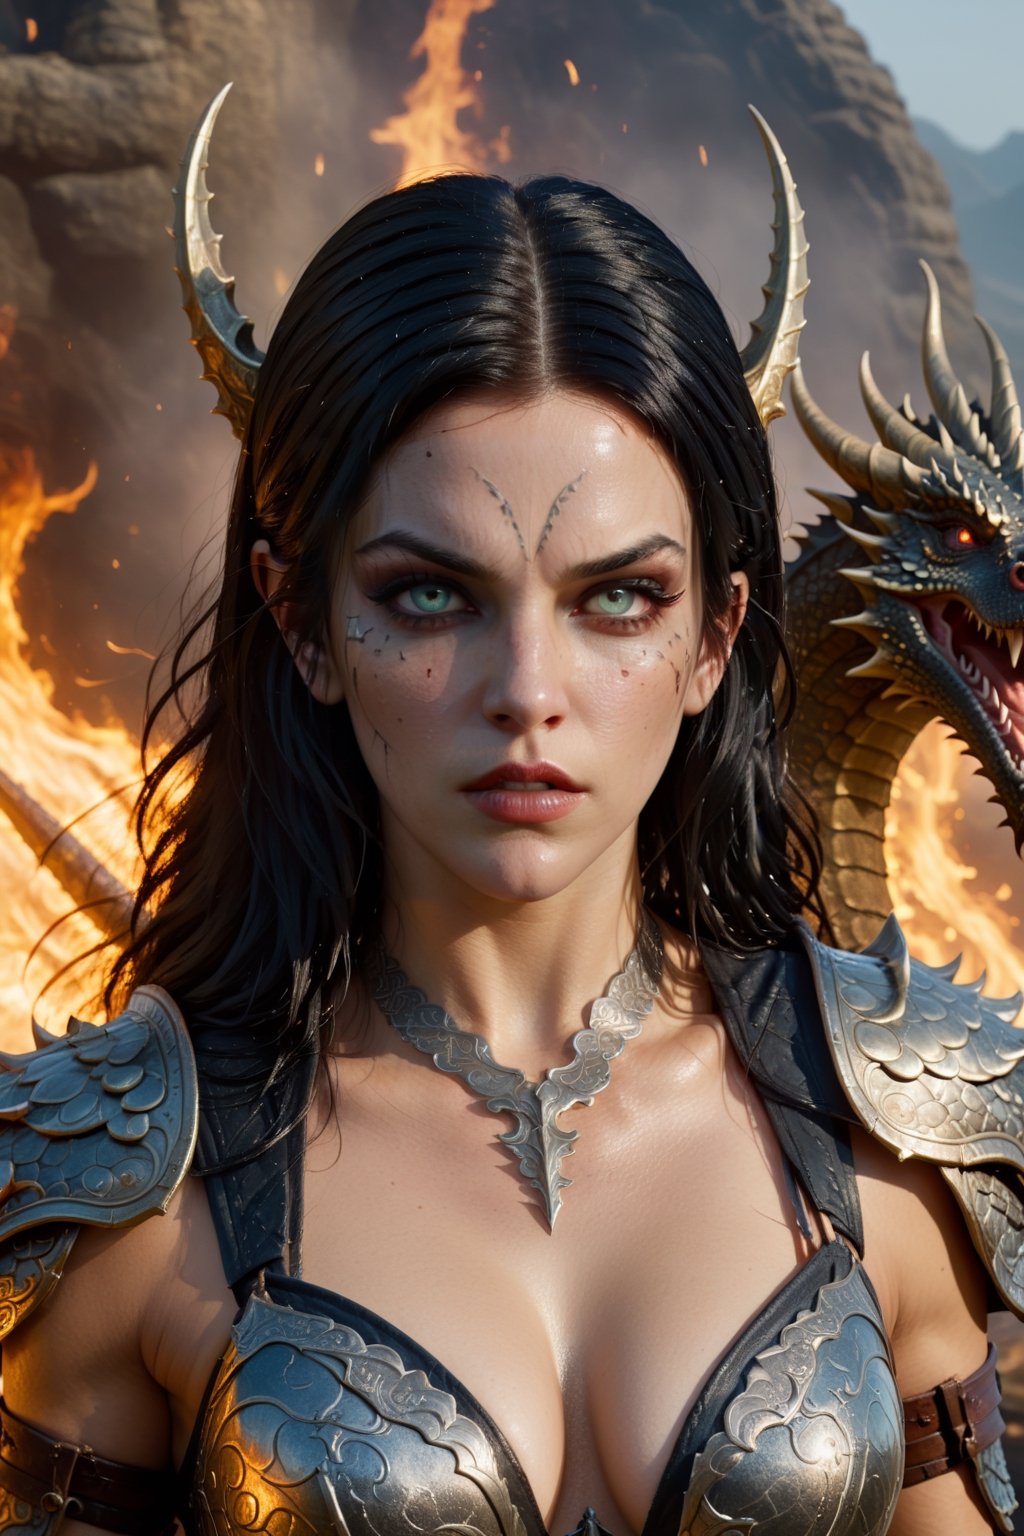 Female warriors and dragons, dark fantasy world, horror, alchemy, desire, NSFW. (hood, black hair tattoos), athletic muscular body, Kane armor, (wet skin, long wavy blond hair, lips, eyes), dynamic poses, magical, brave standing in a fighting stance, Toussaint Malkovich's Art, Highly Detailed Magic, Highly Detailed Faces, More Detail XL, FilmGirl,